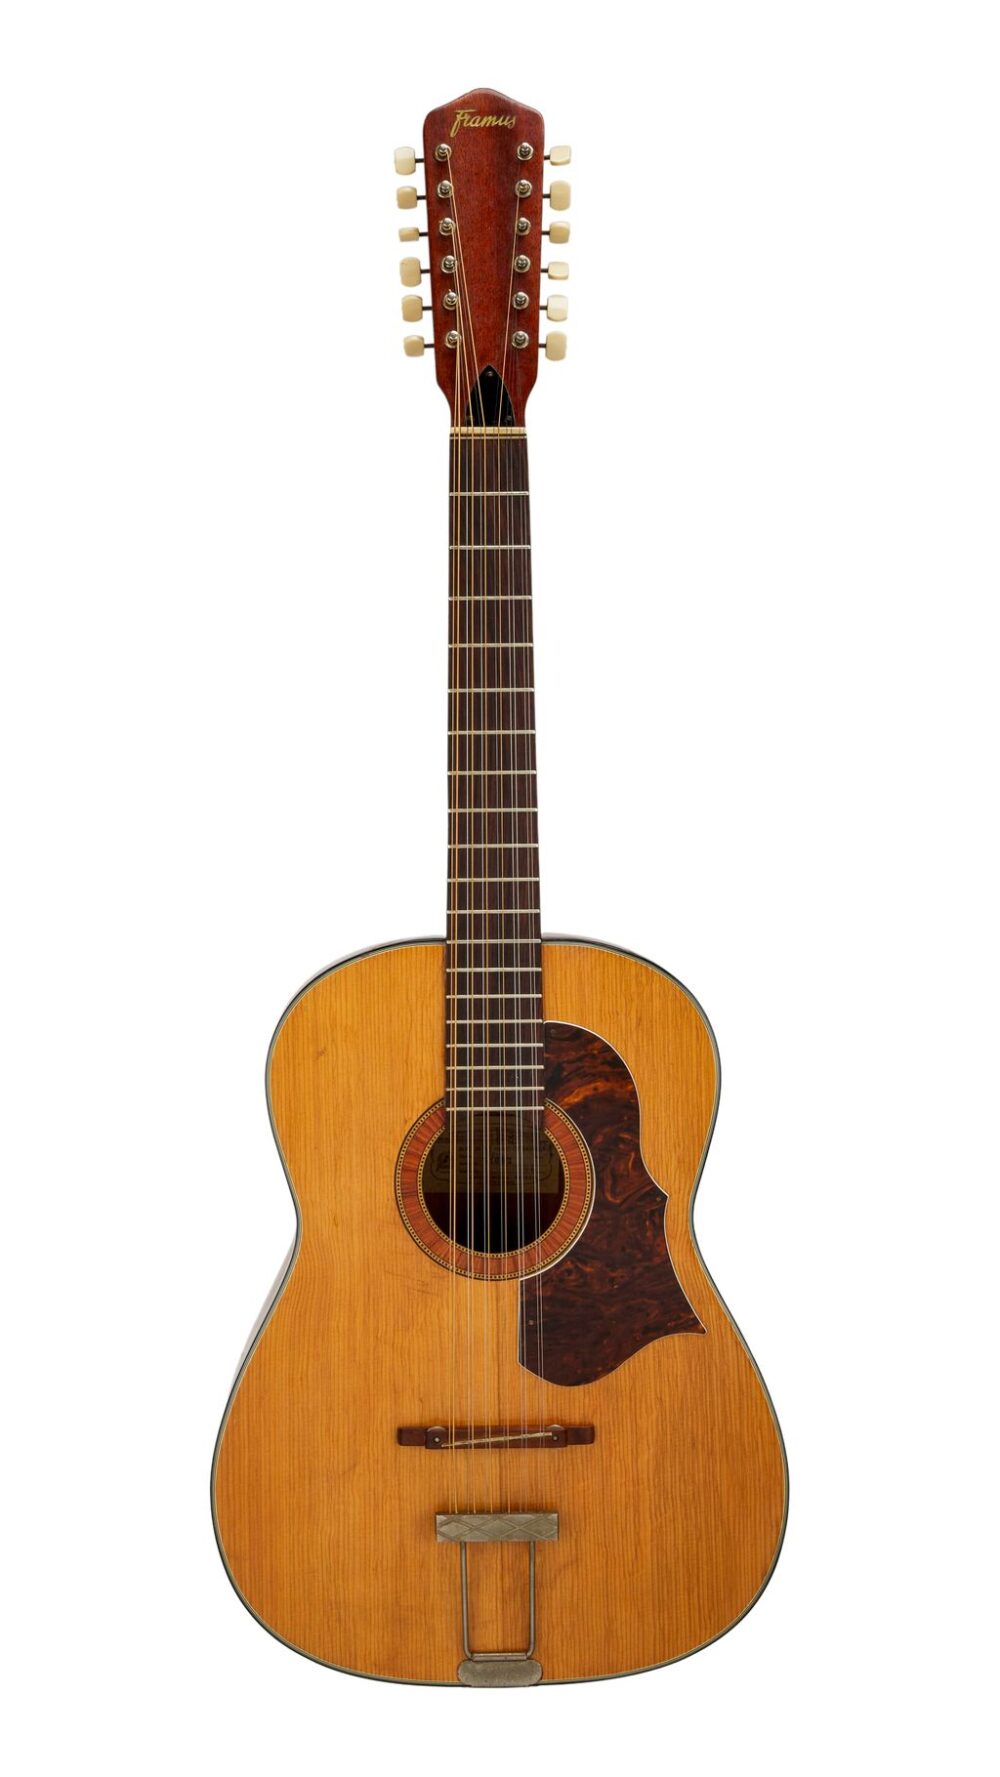 Believed to be lost, the Framus 12-string Hootenanny acoustic guitar, used in the recording of The Beatles’ Help! album and film, had been unseen for more than 50 years. Credit: Julien’s Auctions / PA